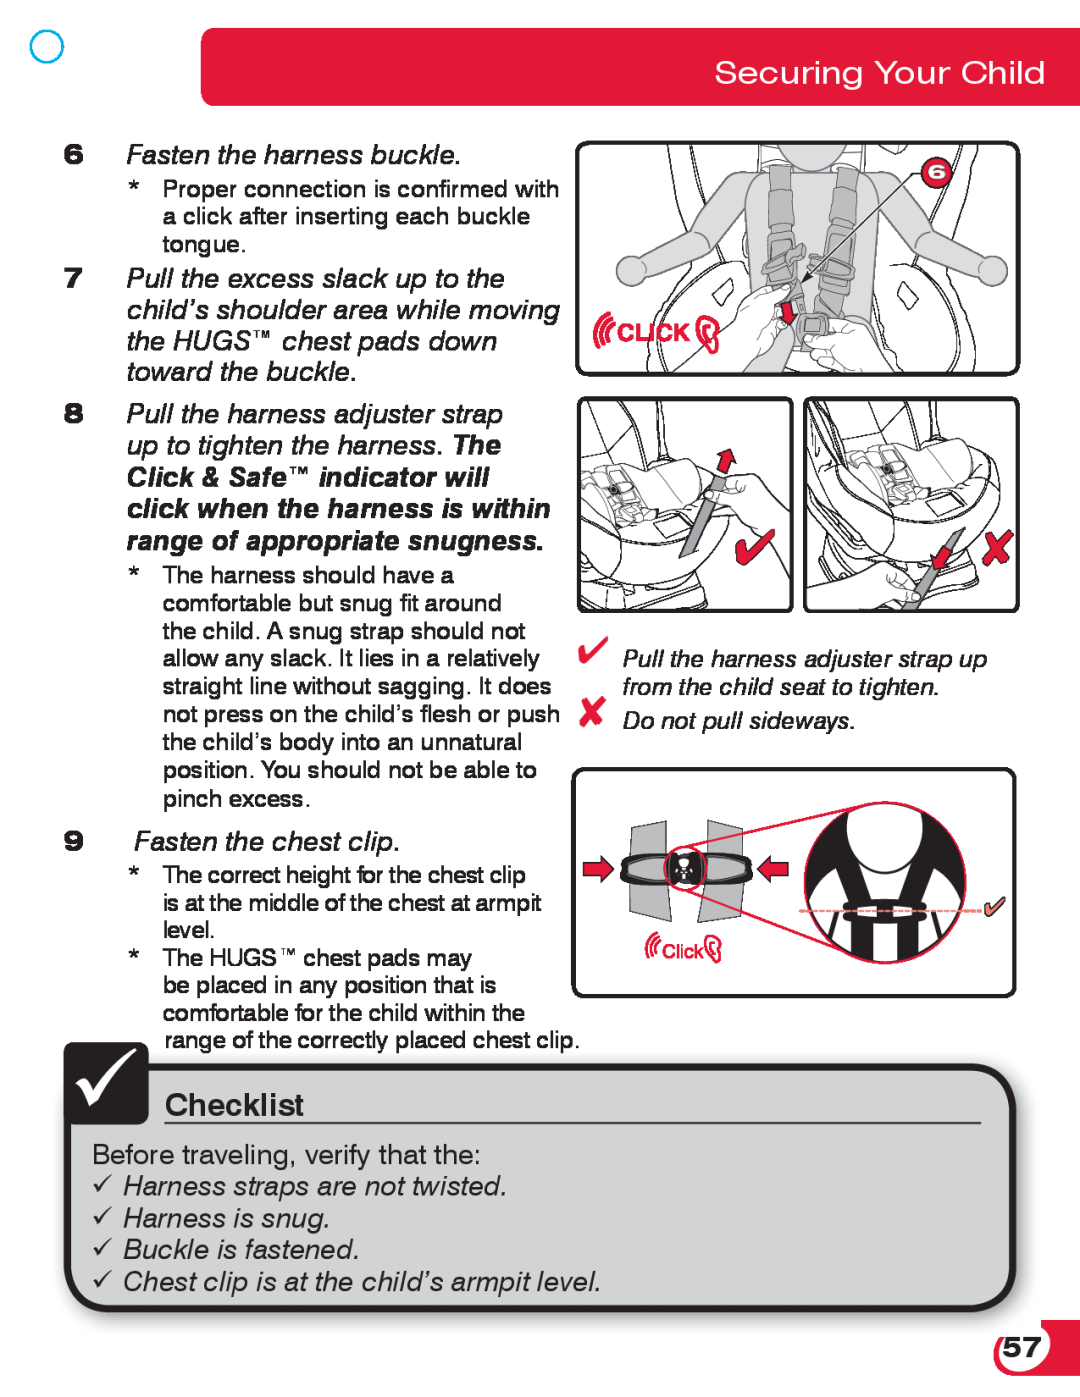 Britax 70 CS manual Securing Your Child, Checklist, Fasten the harness buckle, Fasten the chest clip 